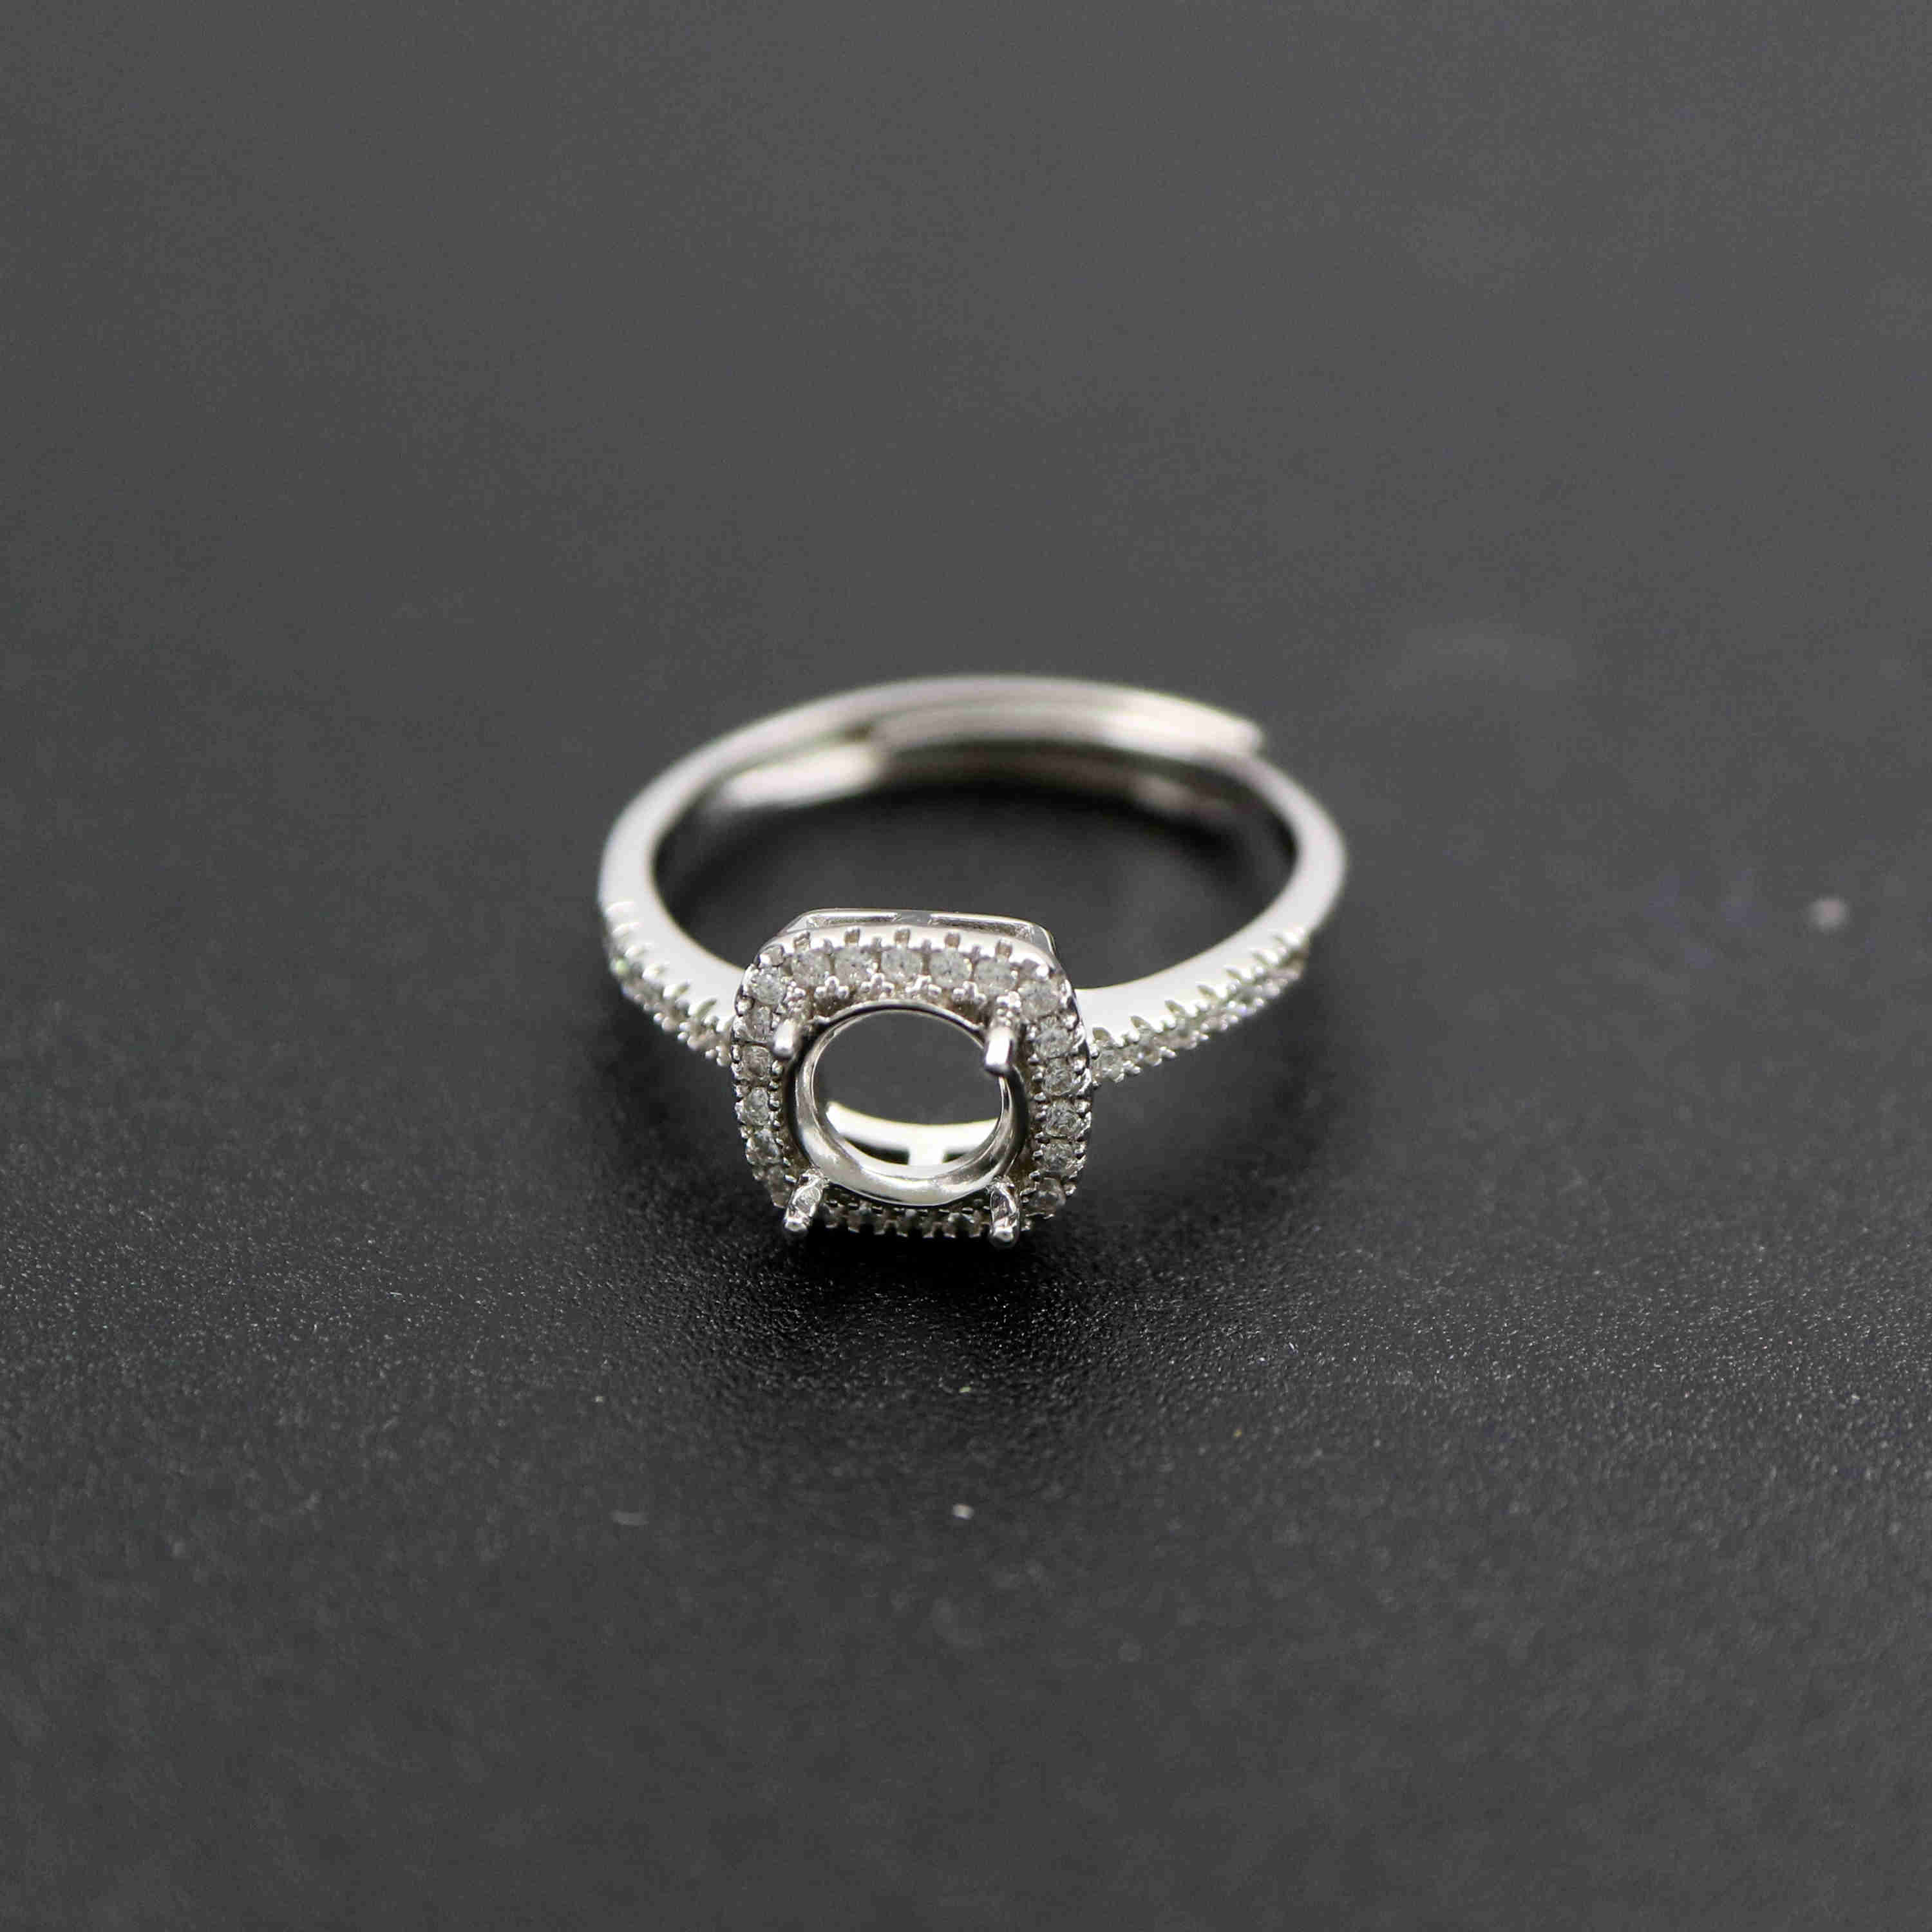 1Pcs 6-8MM Luxury Round Gems Cz Stone Prong Setting Solid 925 Sterling Silver Bezel Tray DIY Adjustable Ring 1214025 - Click Image to Close